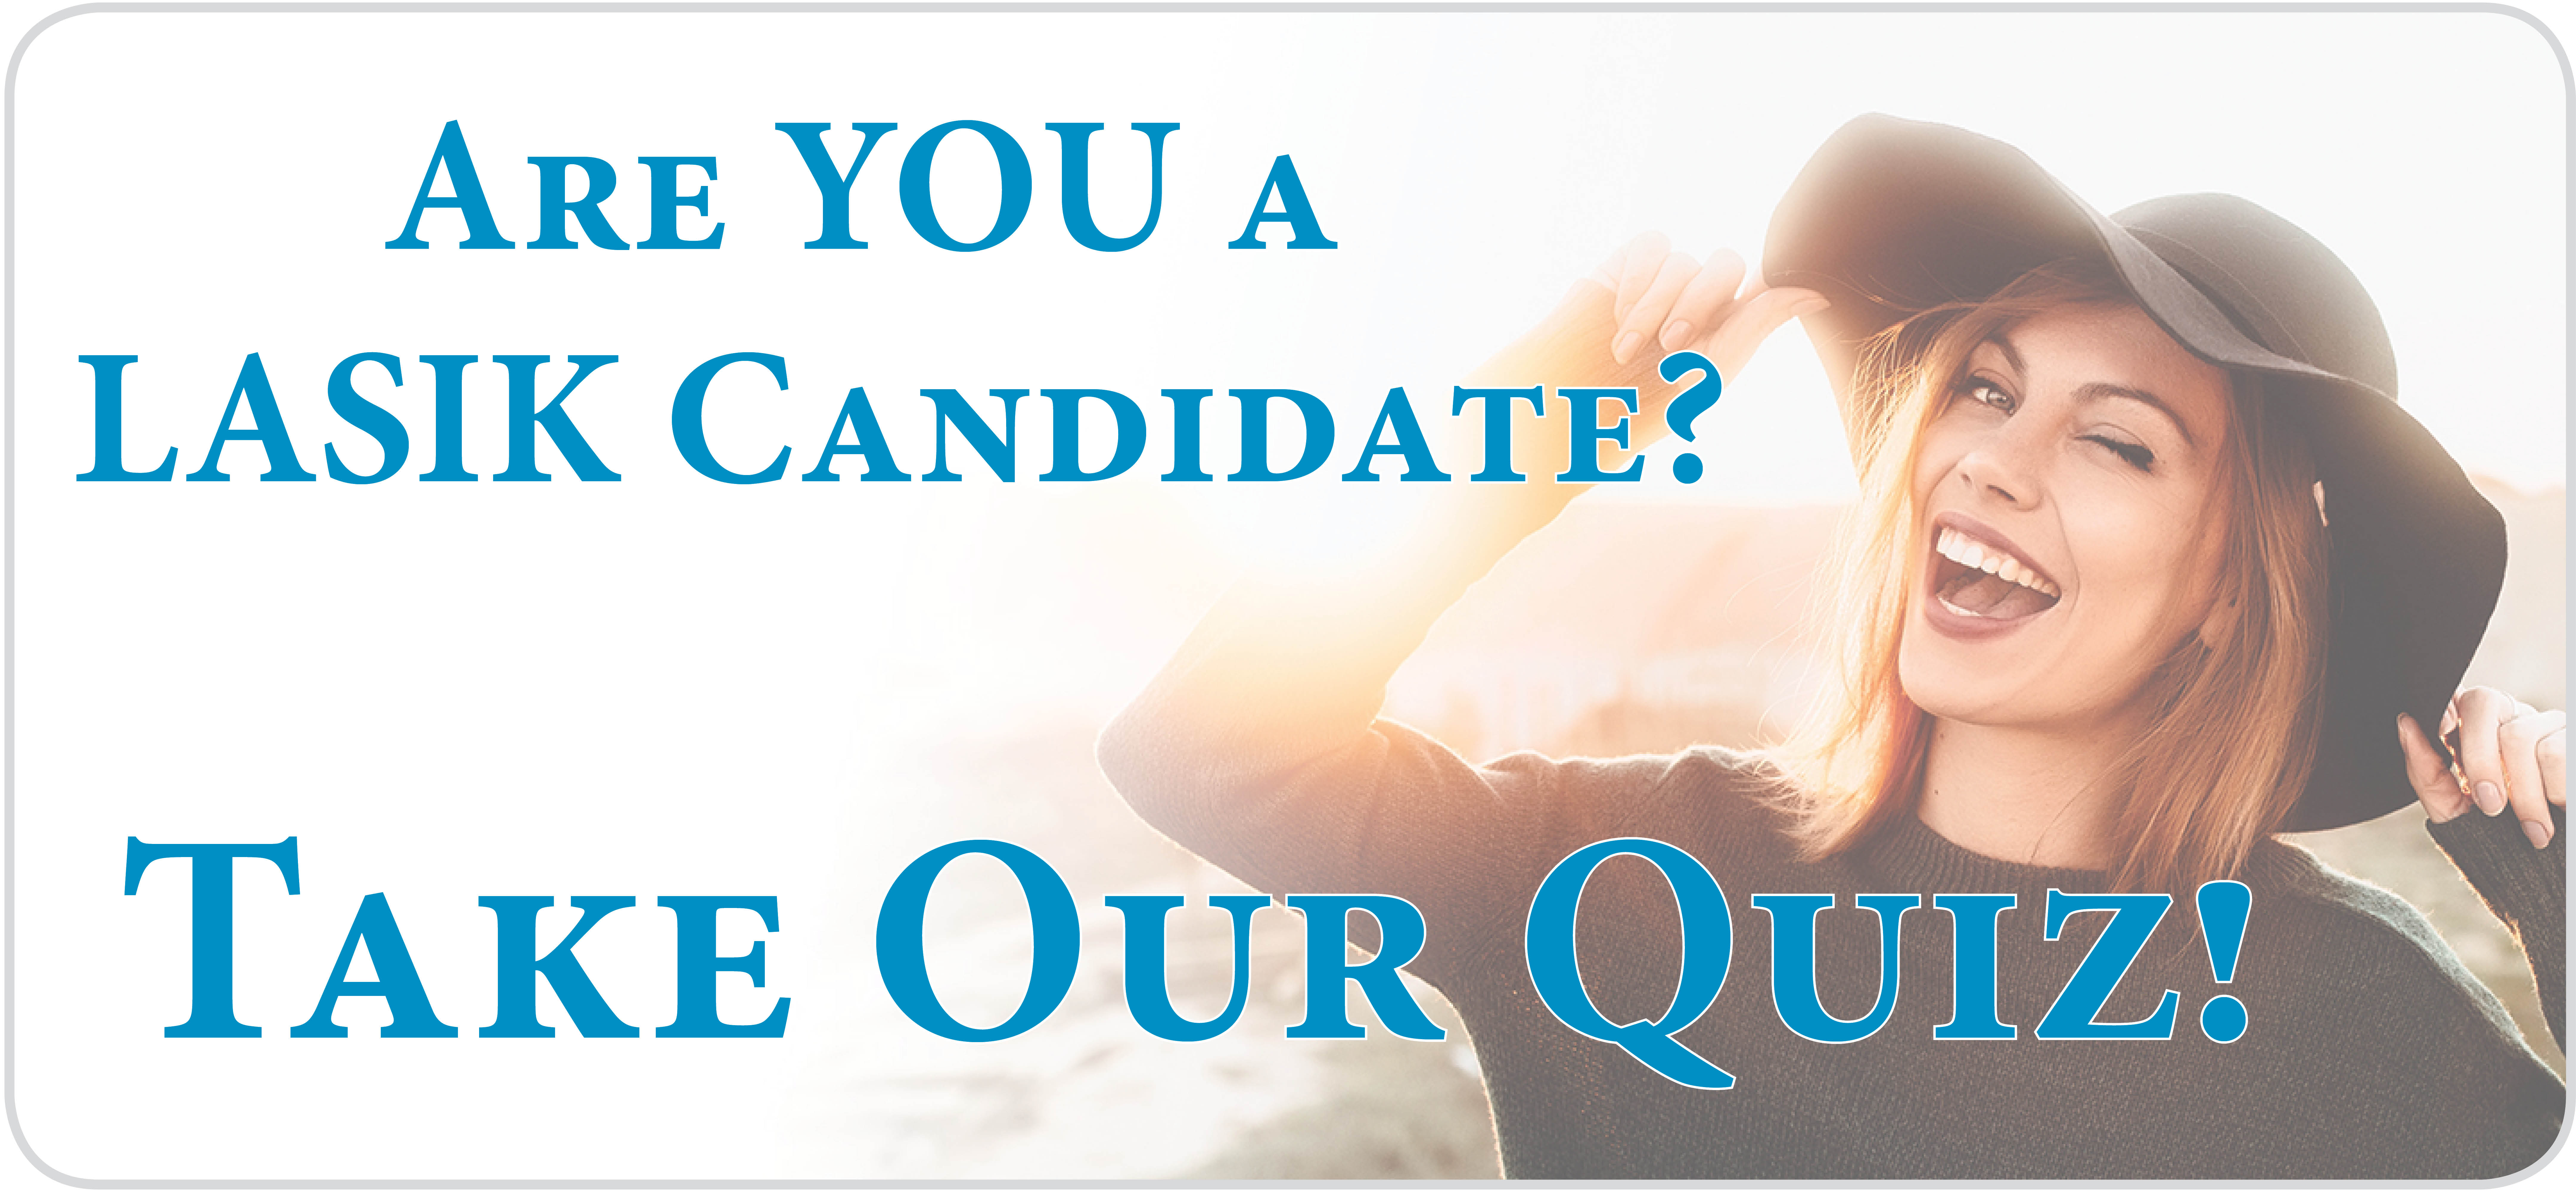 Are You a Candidate for LASIK Surgery?